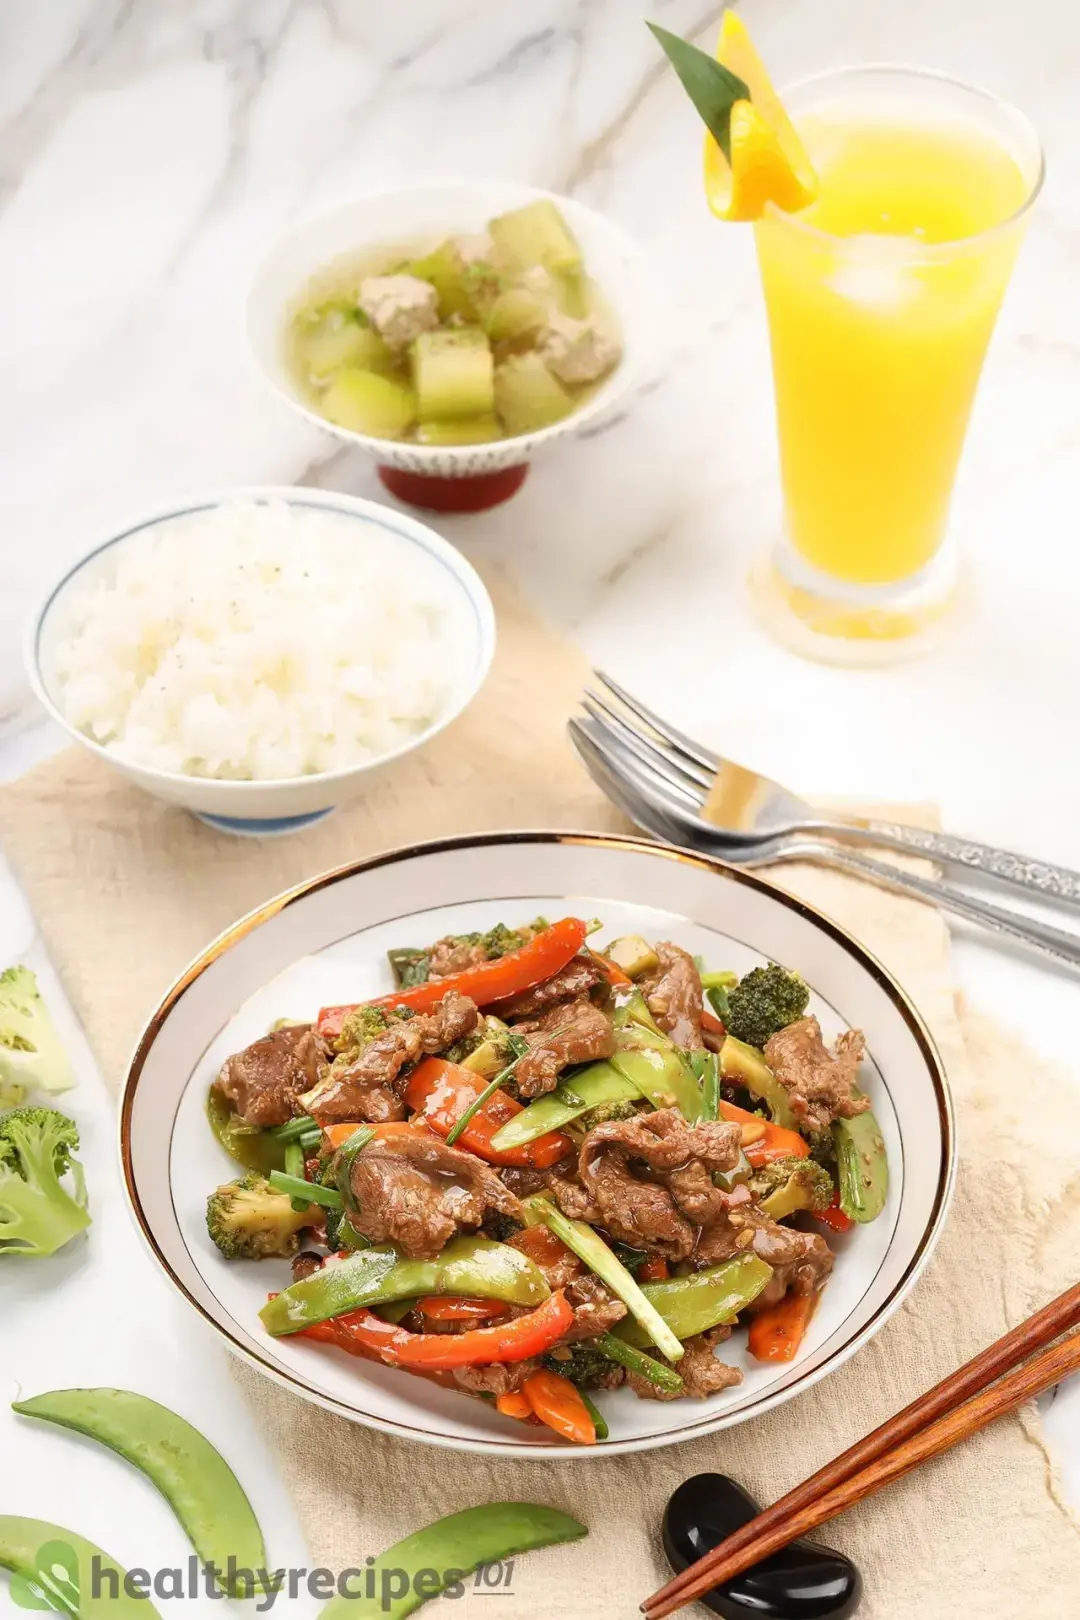 What to Serve With Beef Stir Fry